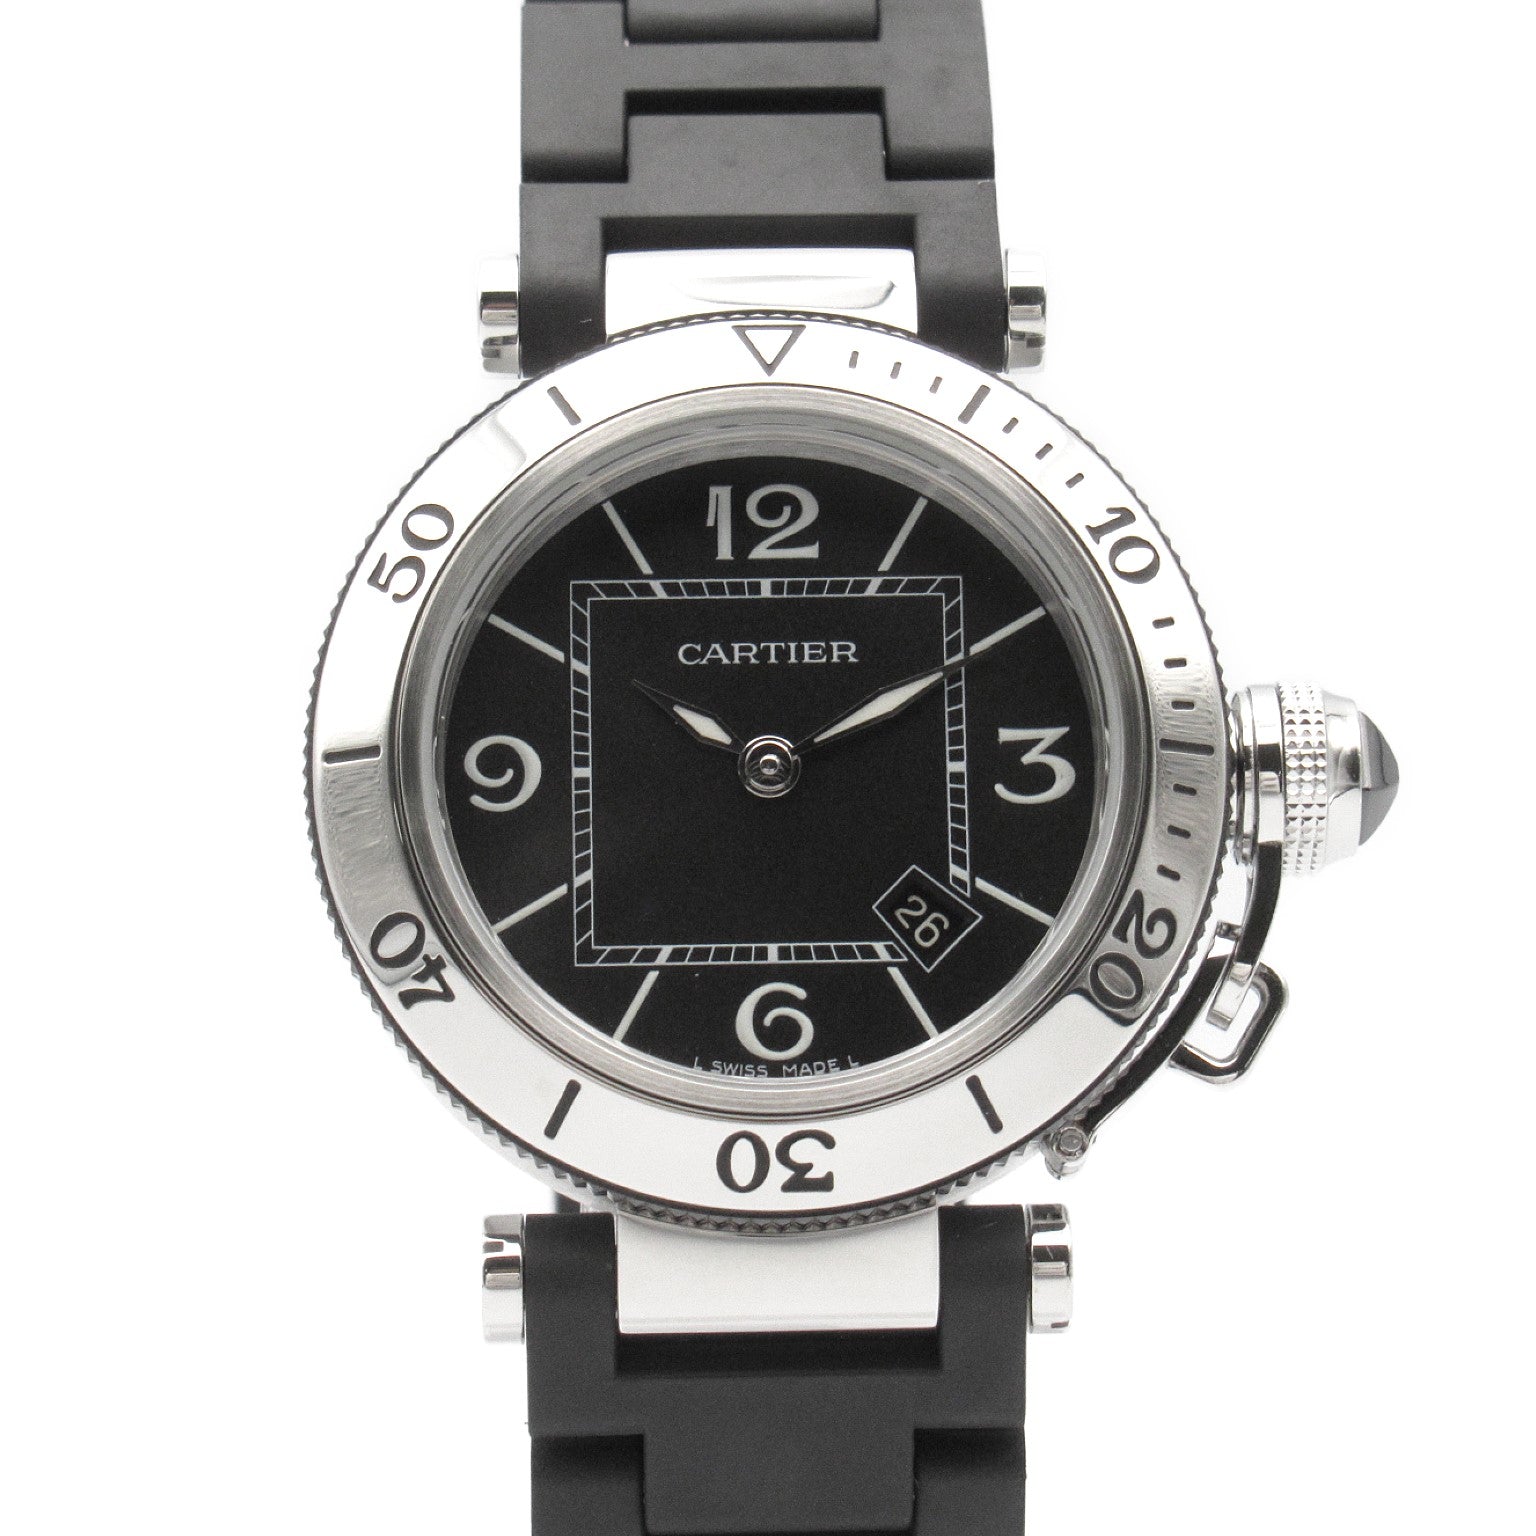 Cartier Cartier Pasha Seat Timer Watch Stainless Steel Lavender  Black W3140003